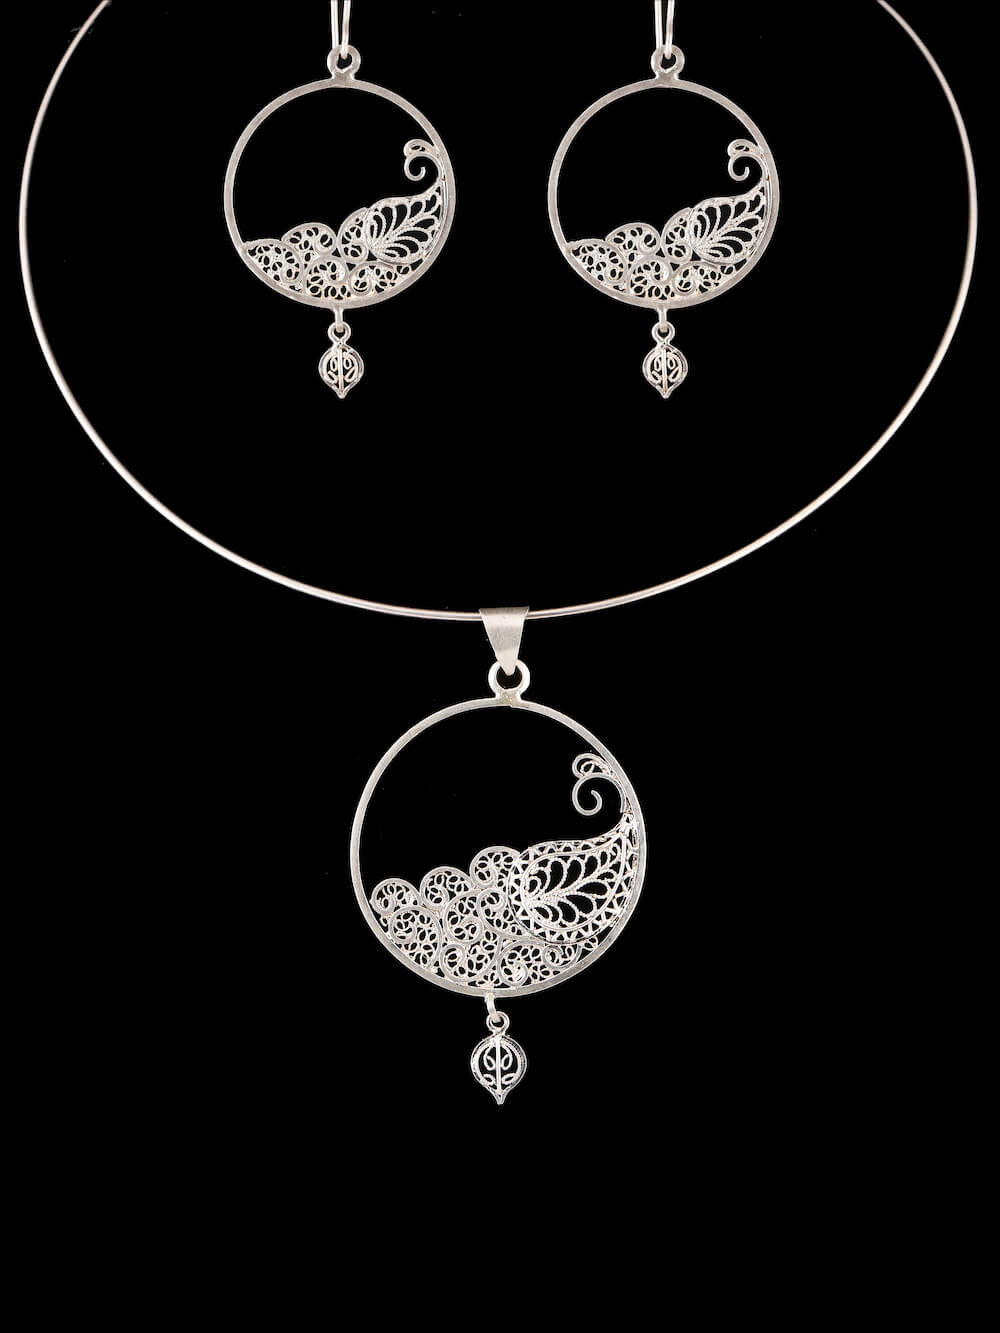 Peacock in a circle Earrings and Pendant Set